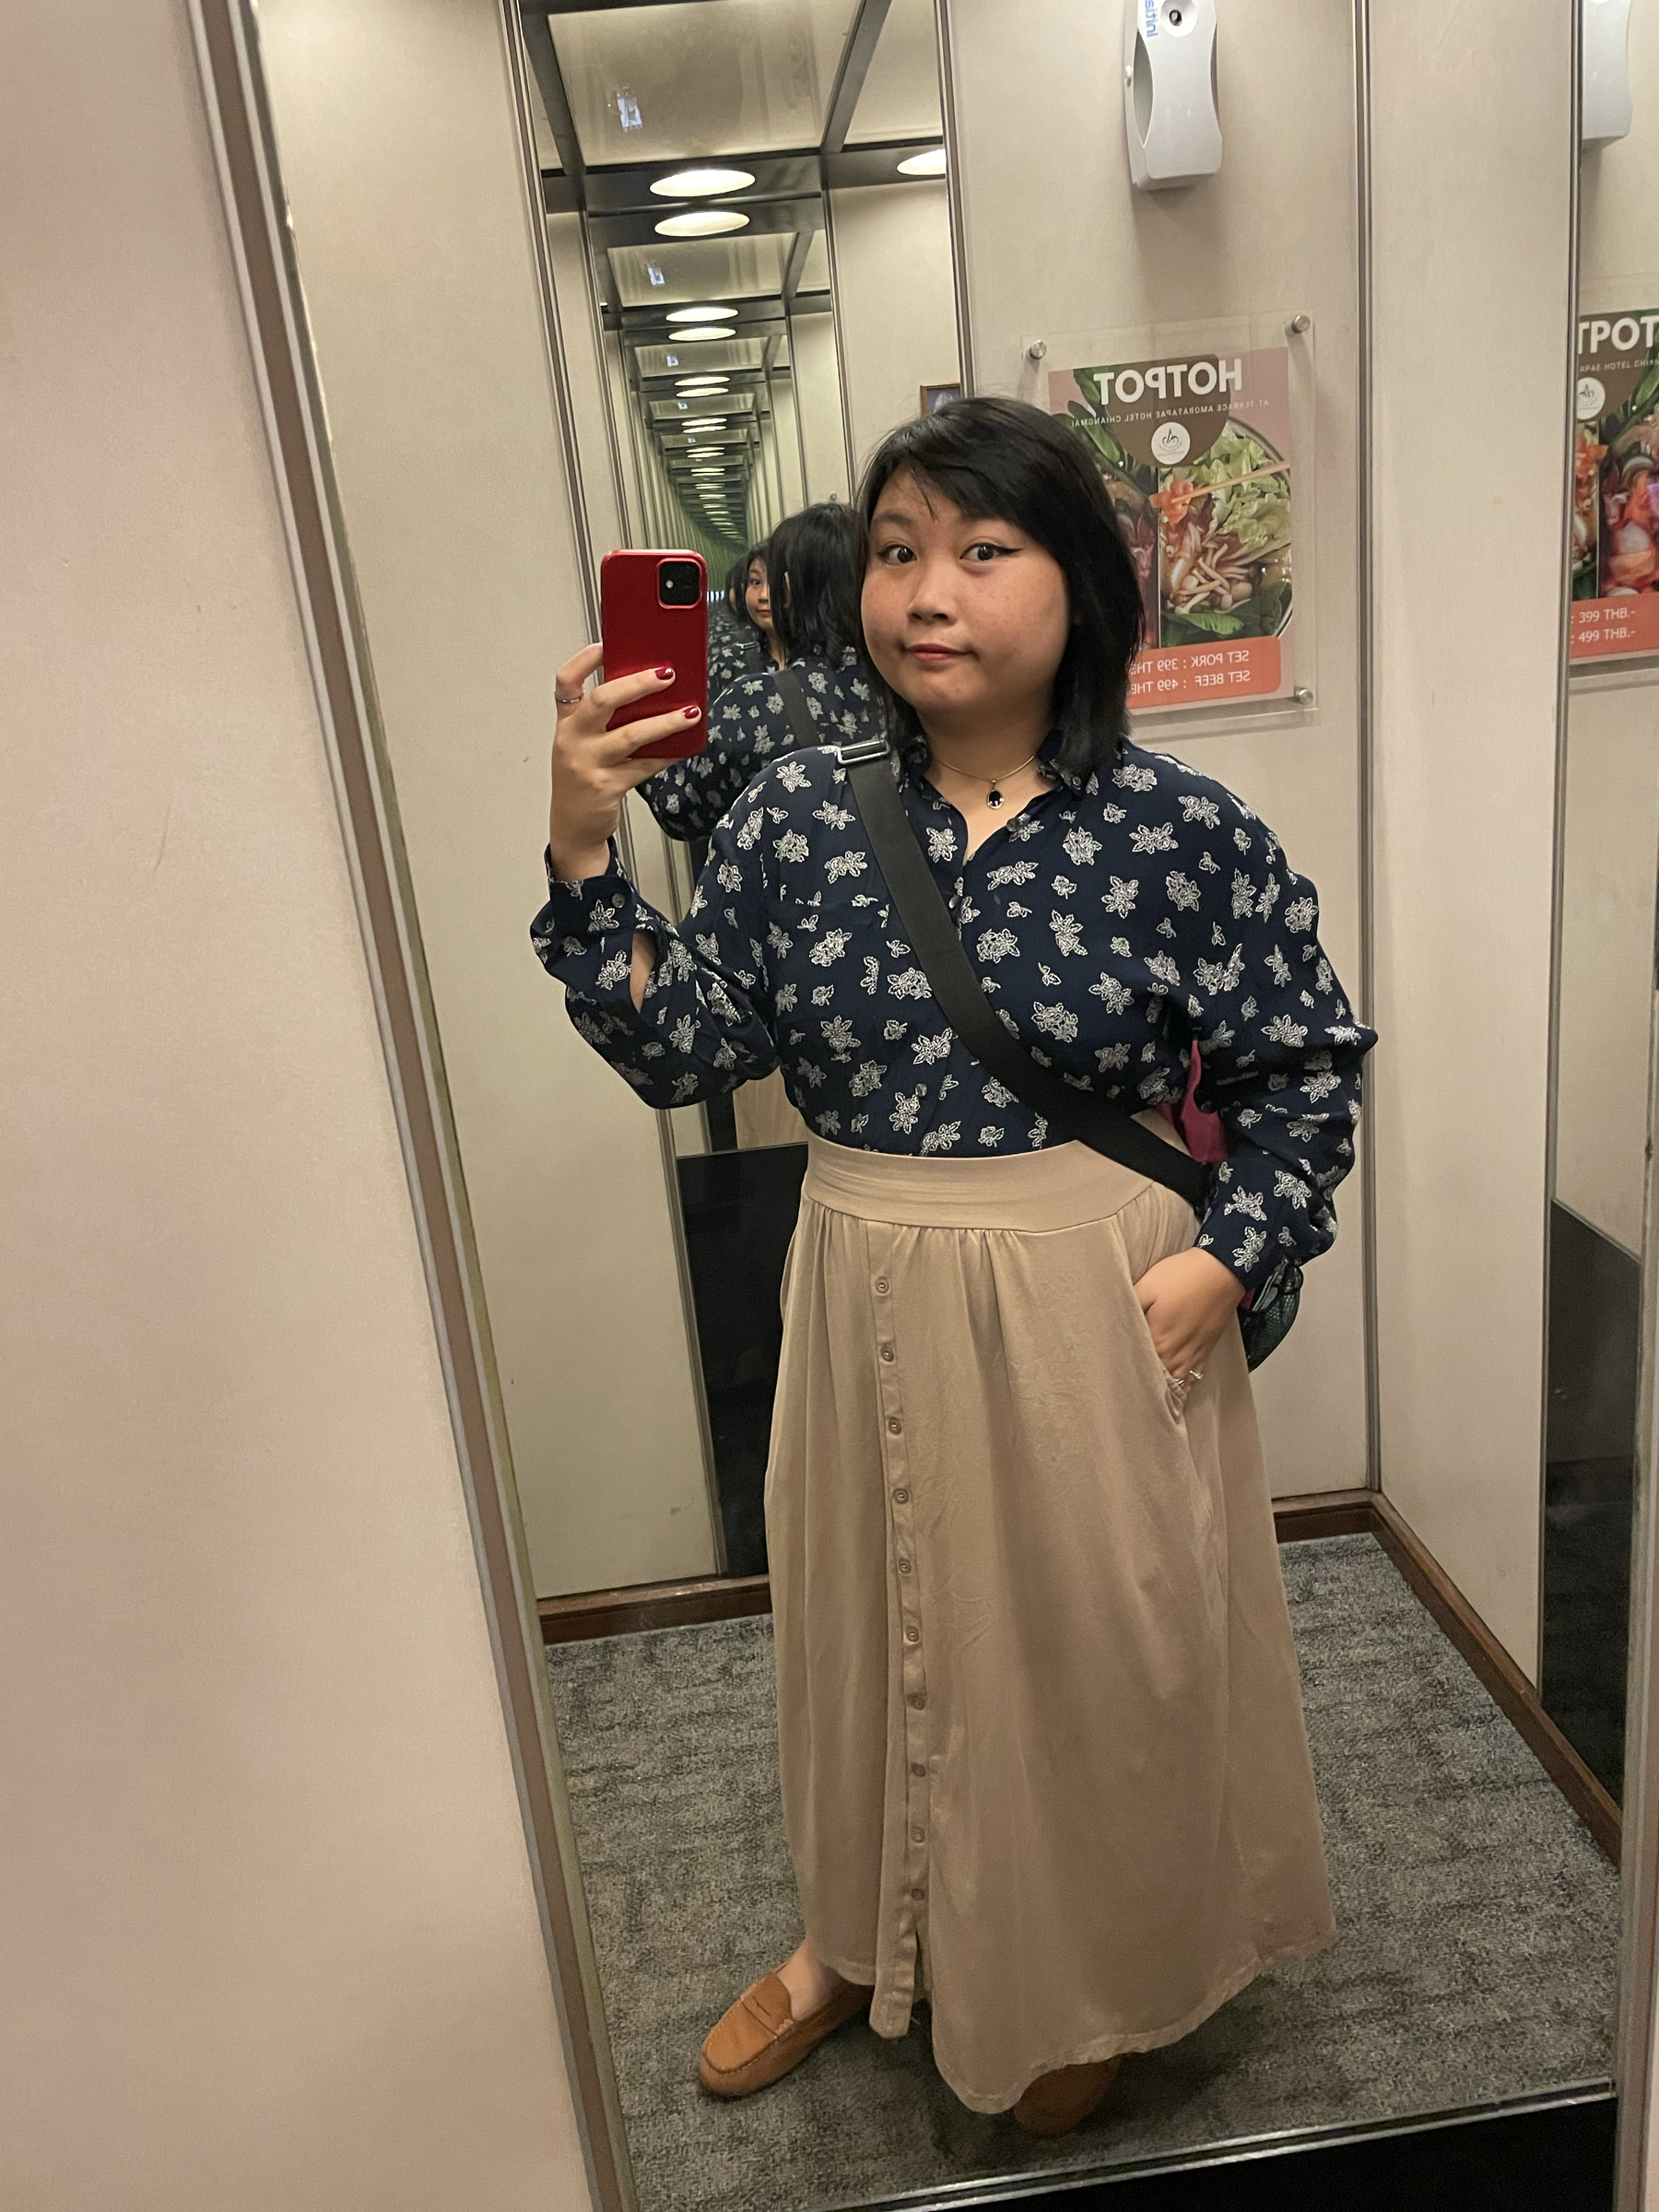 Mirror elevator selfie of Chi showing her current outfit for the day: a long-sleeved blue polo shirt with a leaves pattern tucked in a long beige skirt.